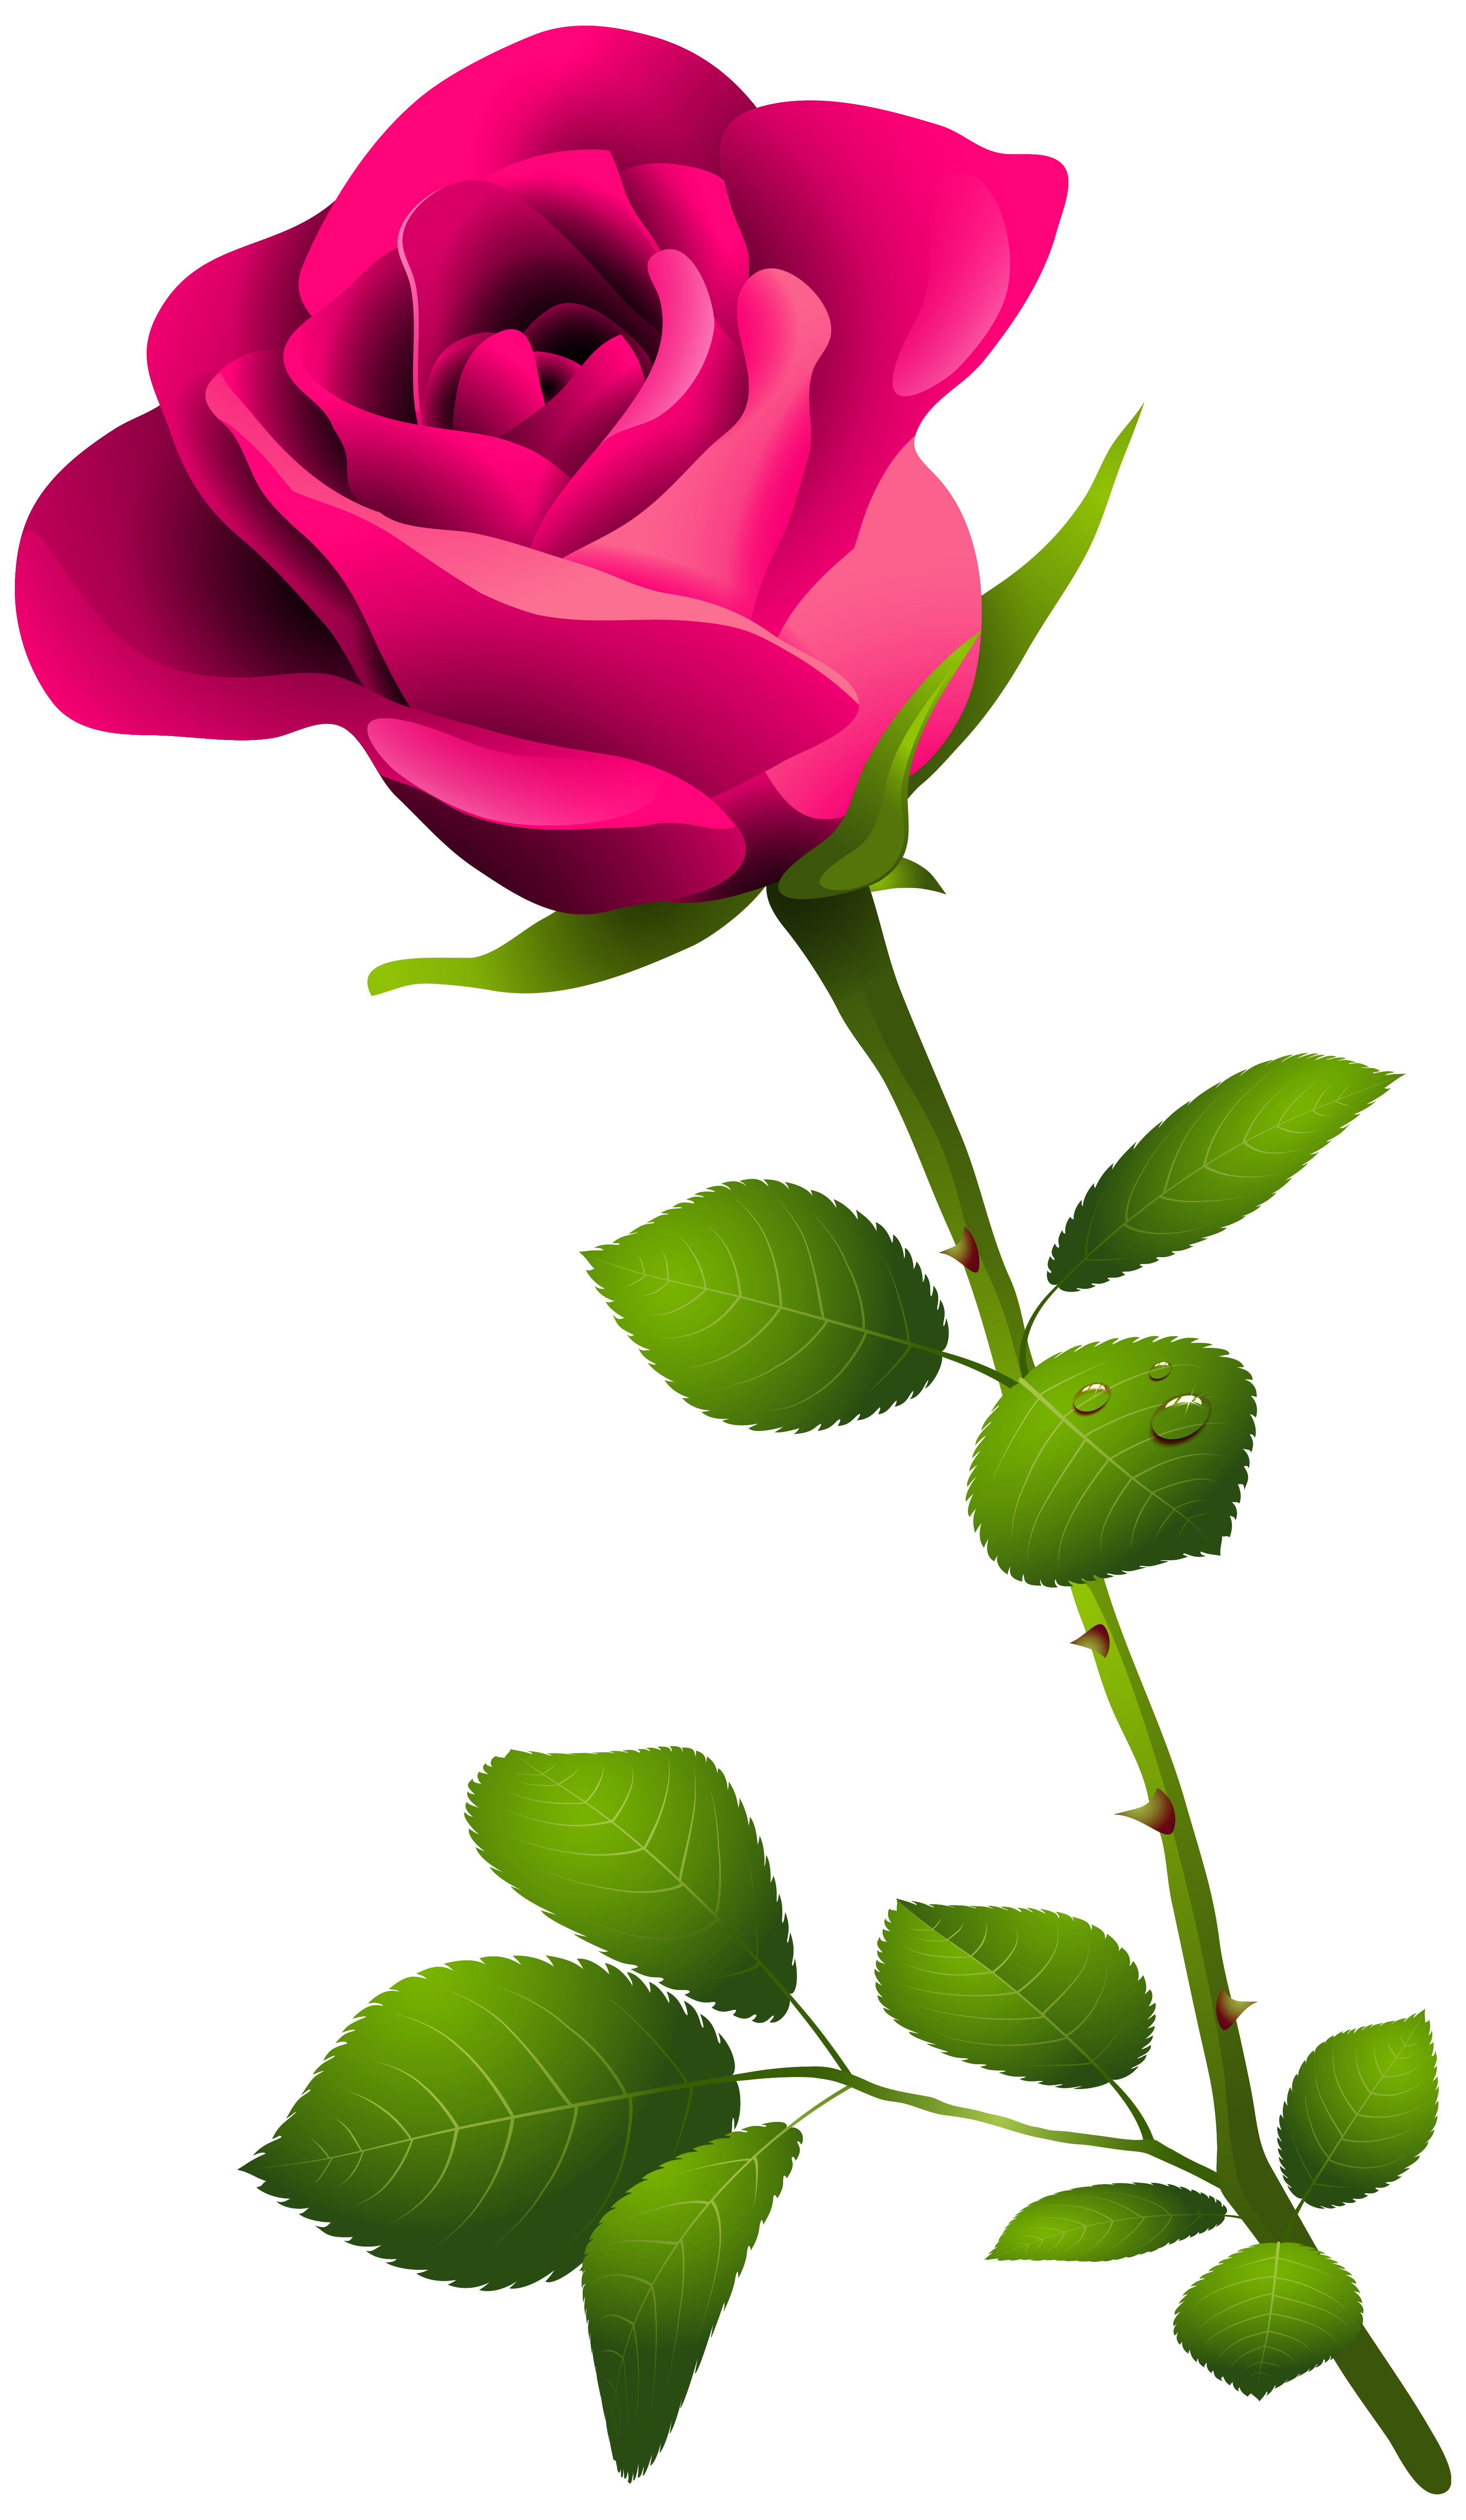 Pink Rose with Stem PNG Clipart Image